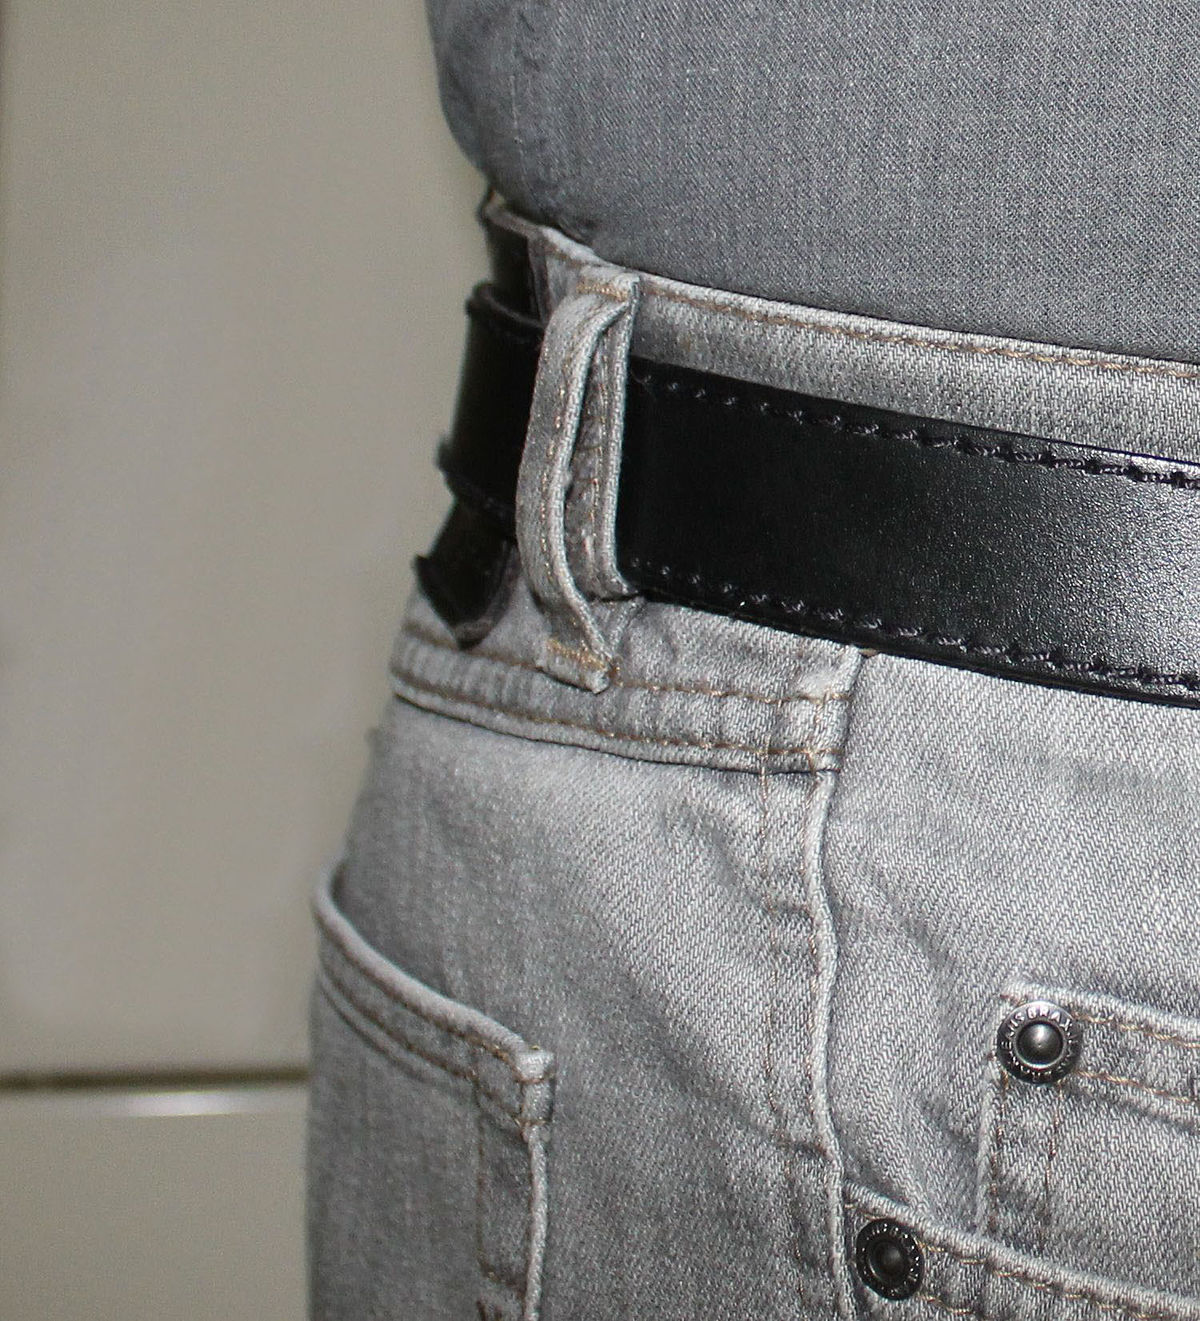 How to Sew Belt Loops - Easily & Quickly